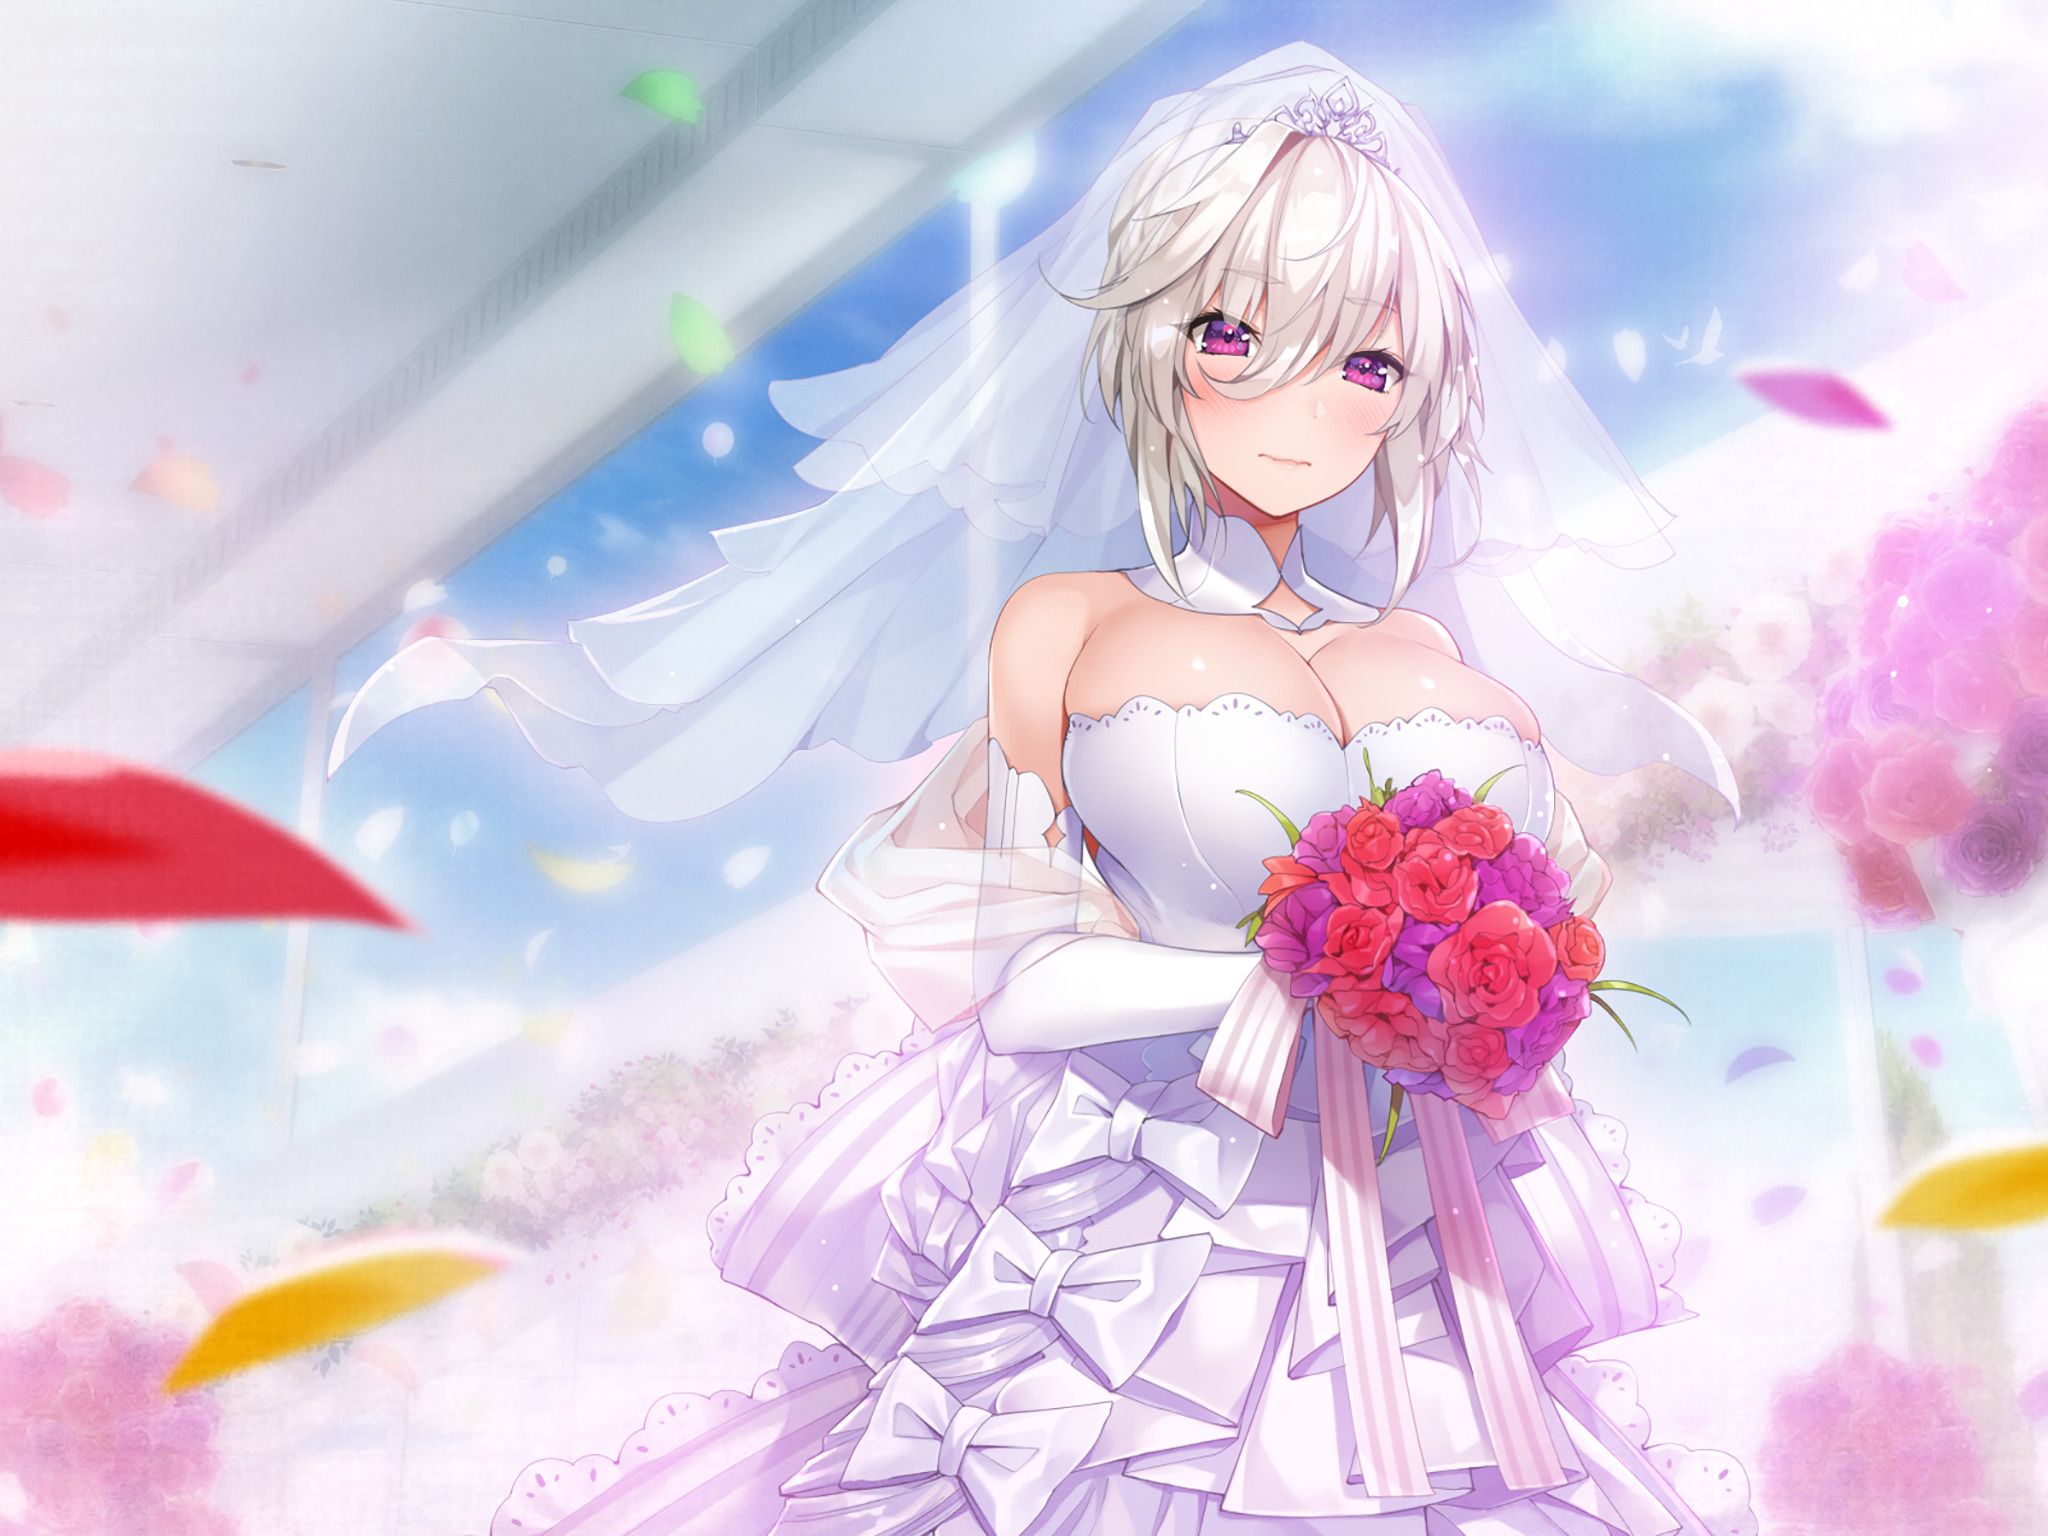 Download Wallpaper and Picture: Girl, dress, wedding, anime